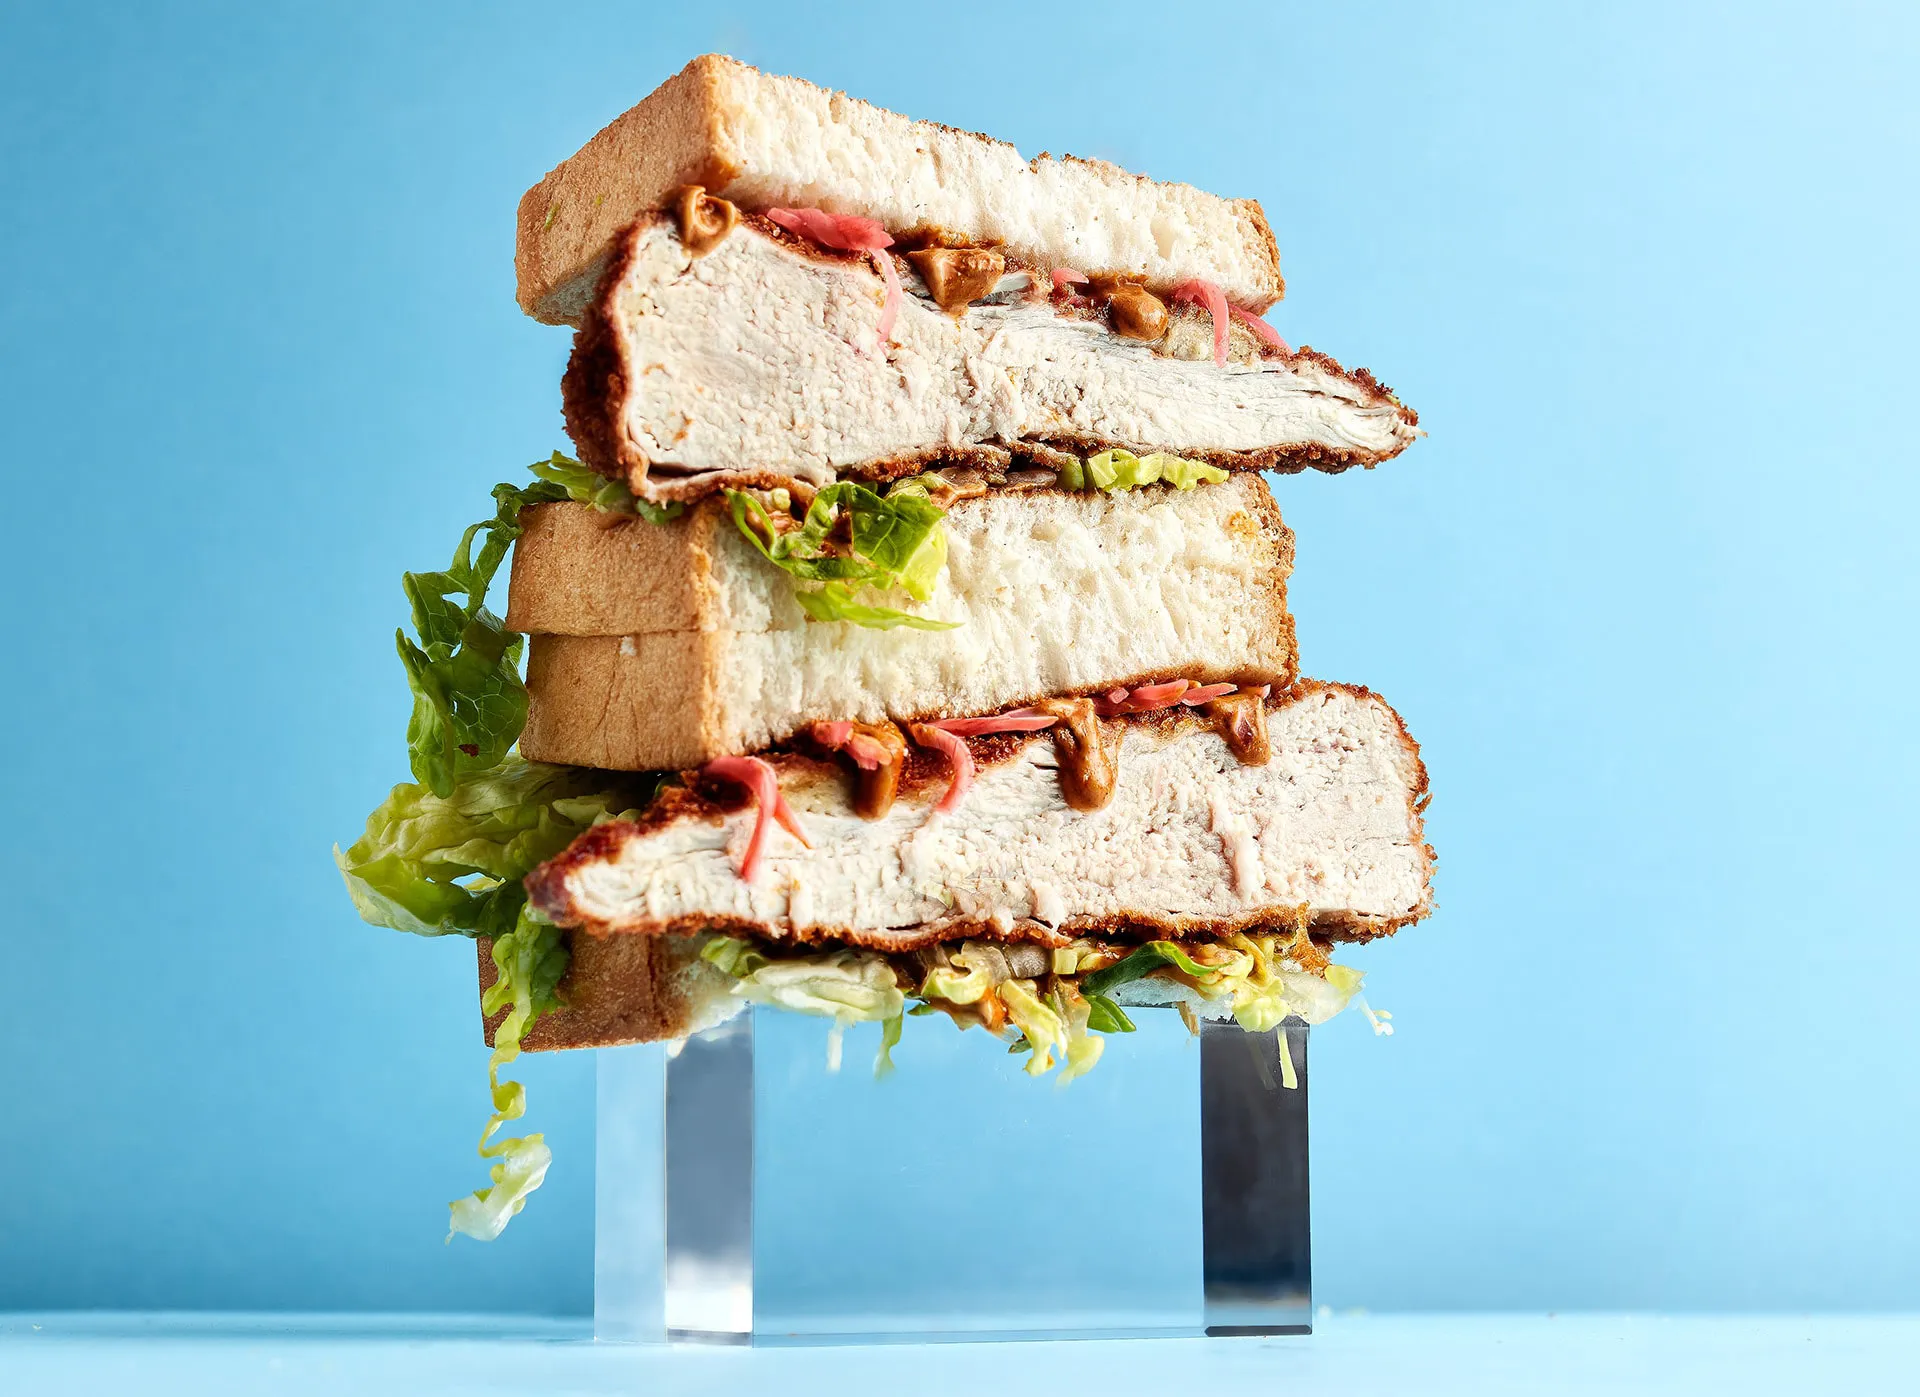 Mouthwatering towering chicken sandwich on blue background.